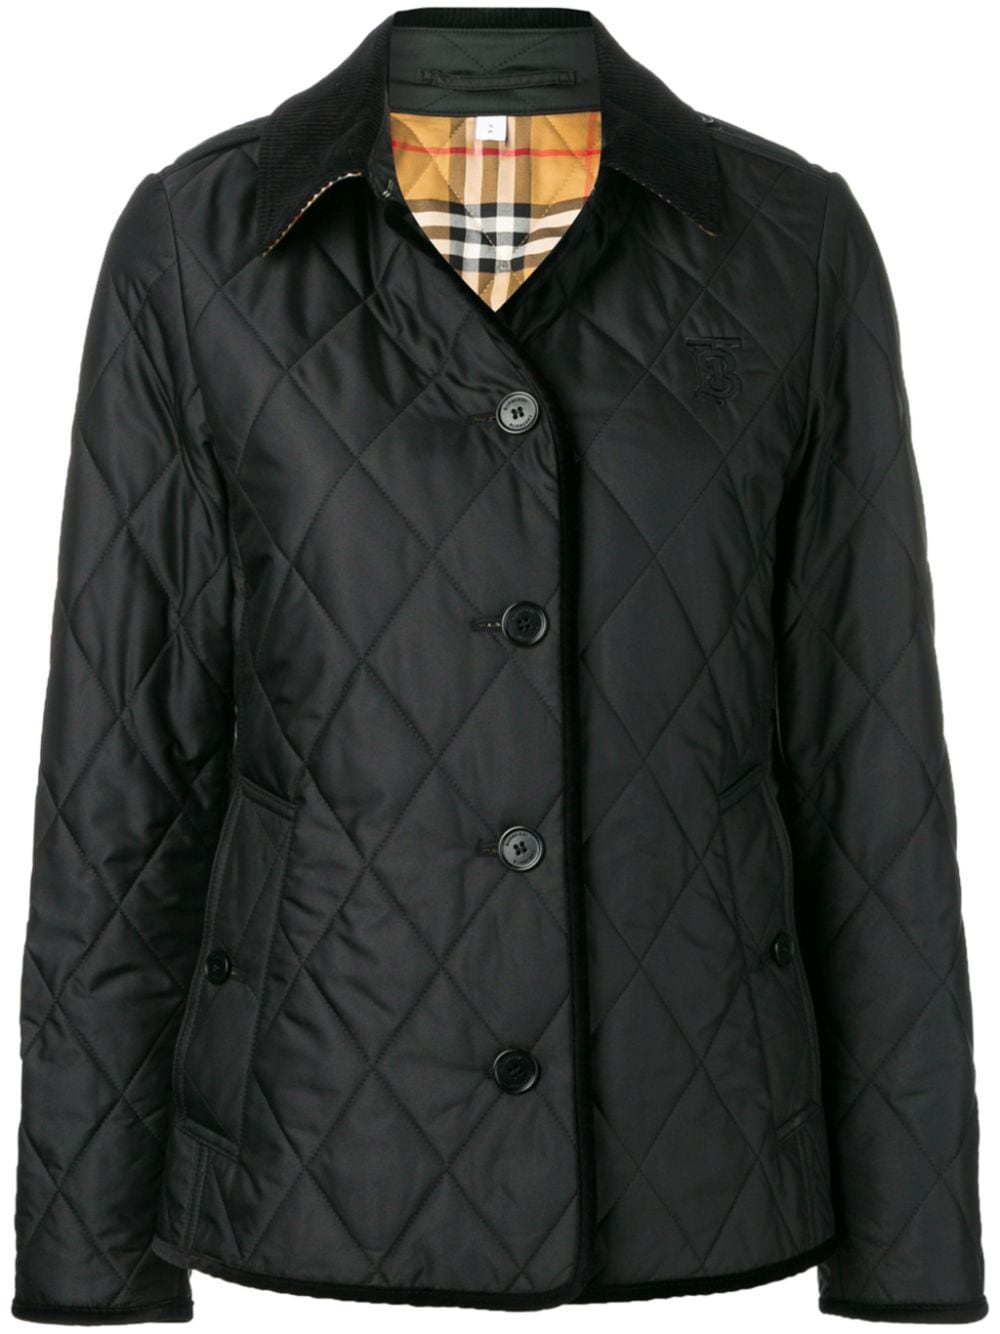 Burberry Diamond Quilted Jacket - Farfetch